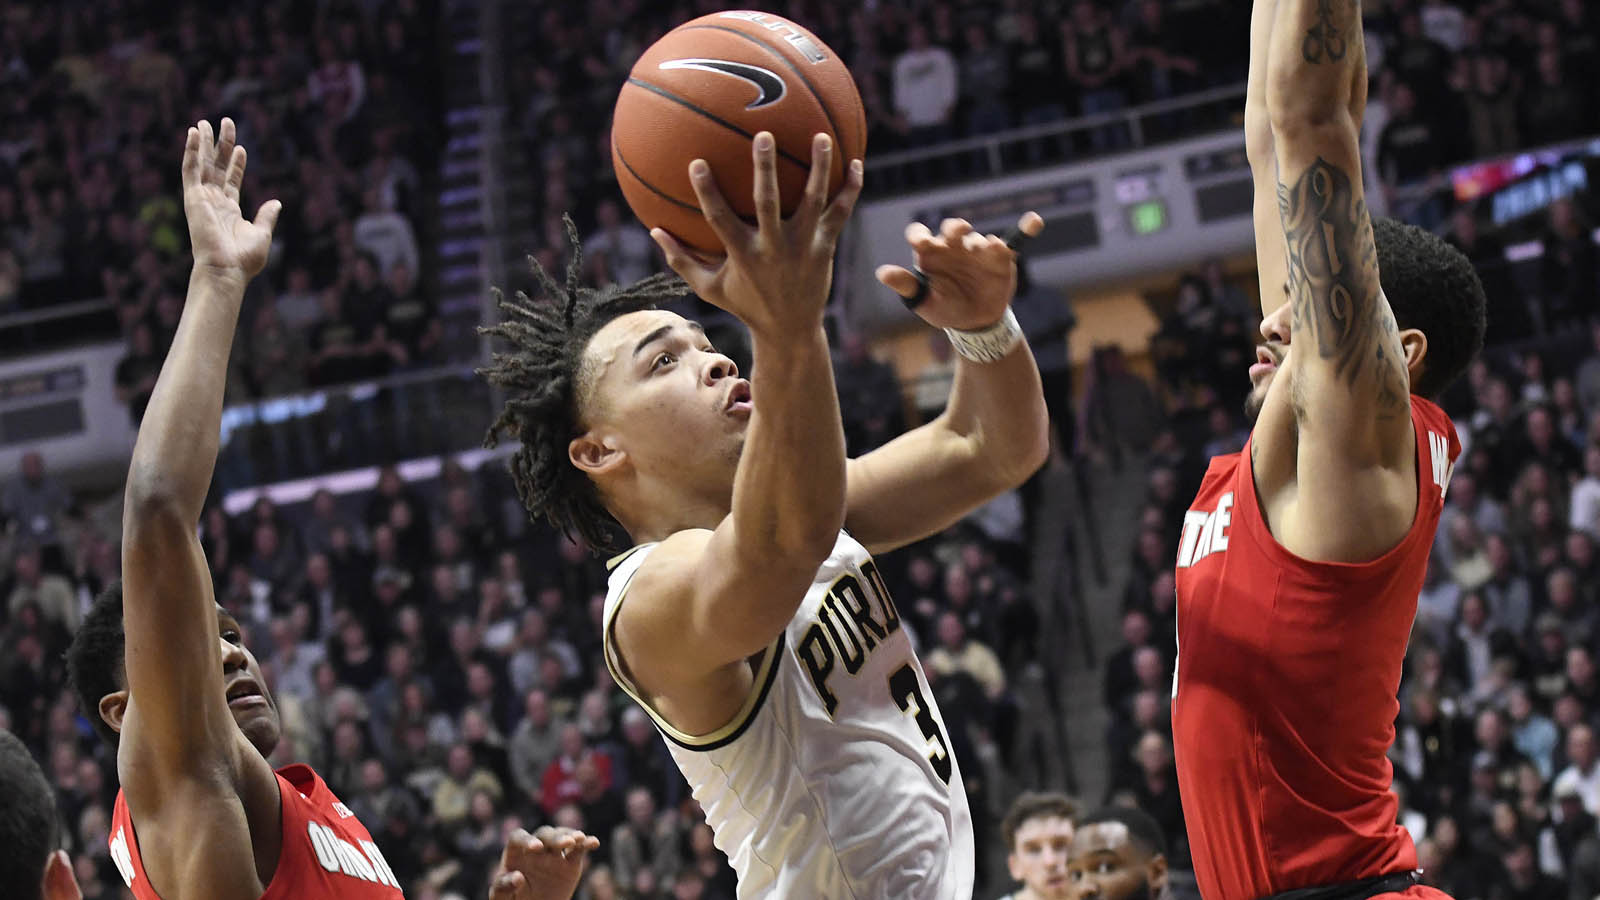 Purdue takes sole possession of Big Ten lead with 86-51 win over Ohio State